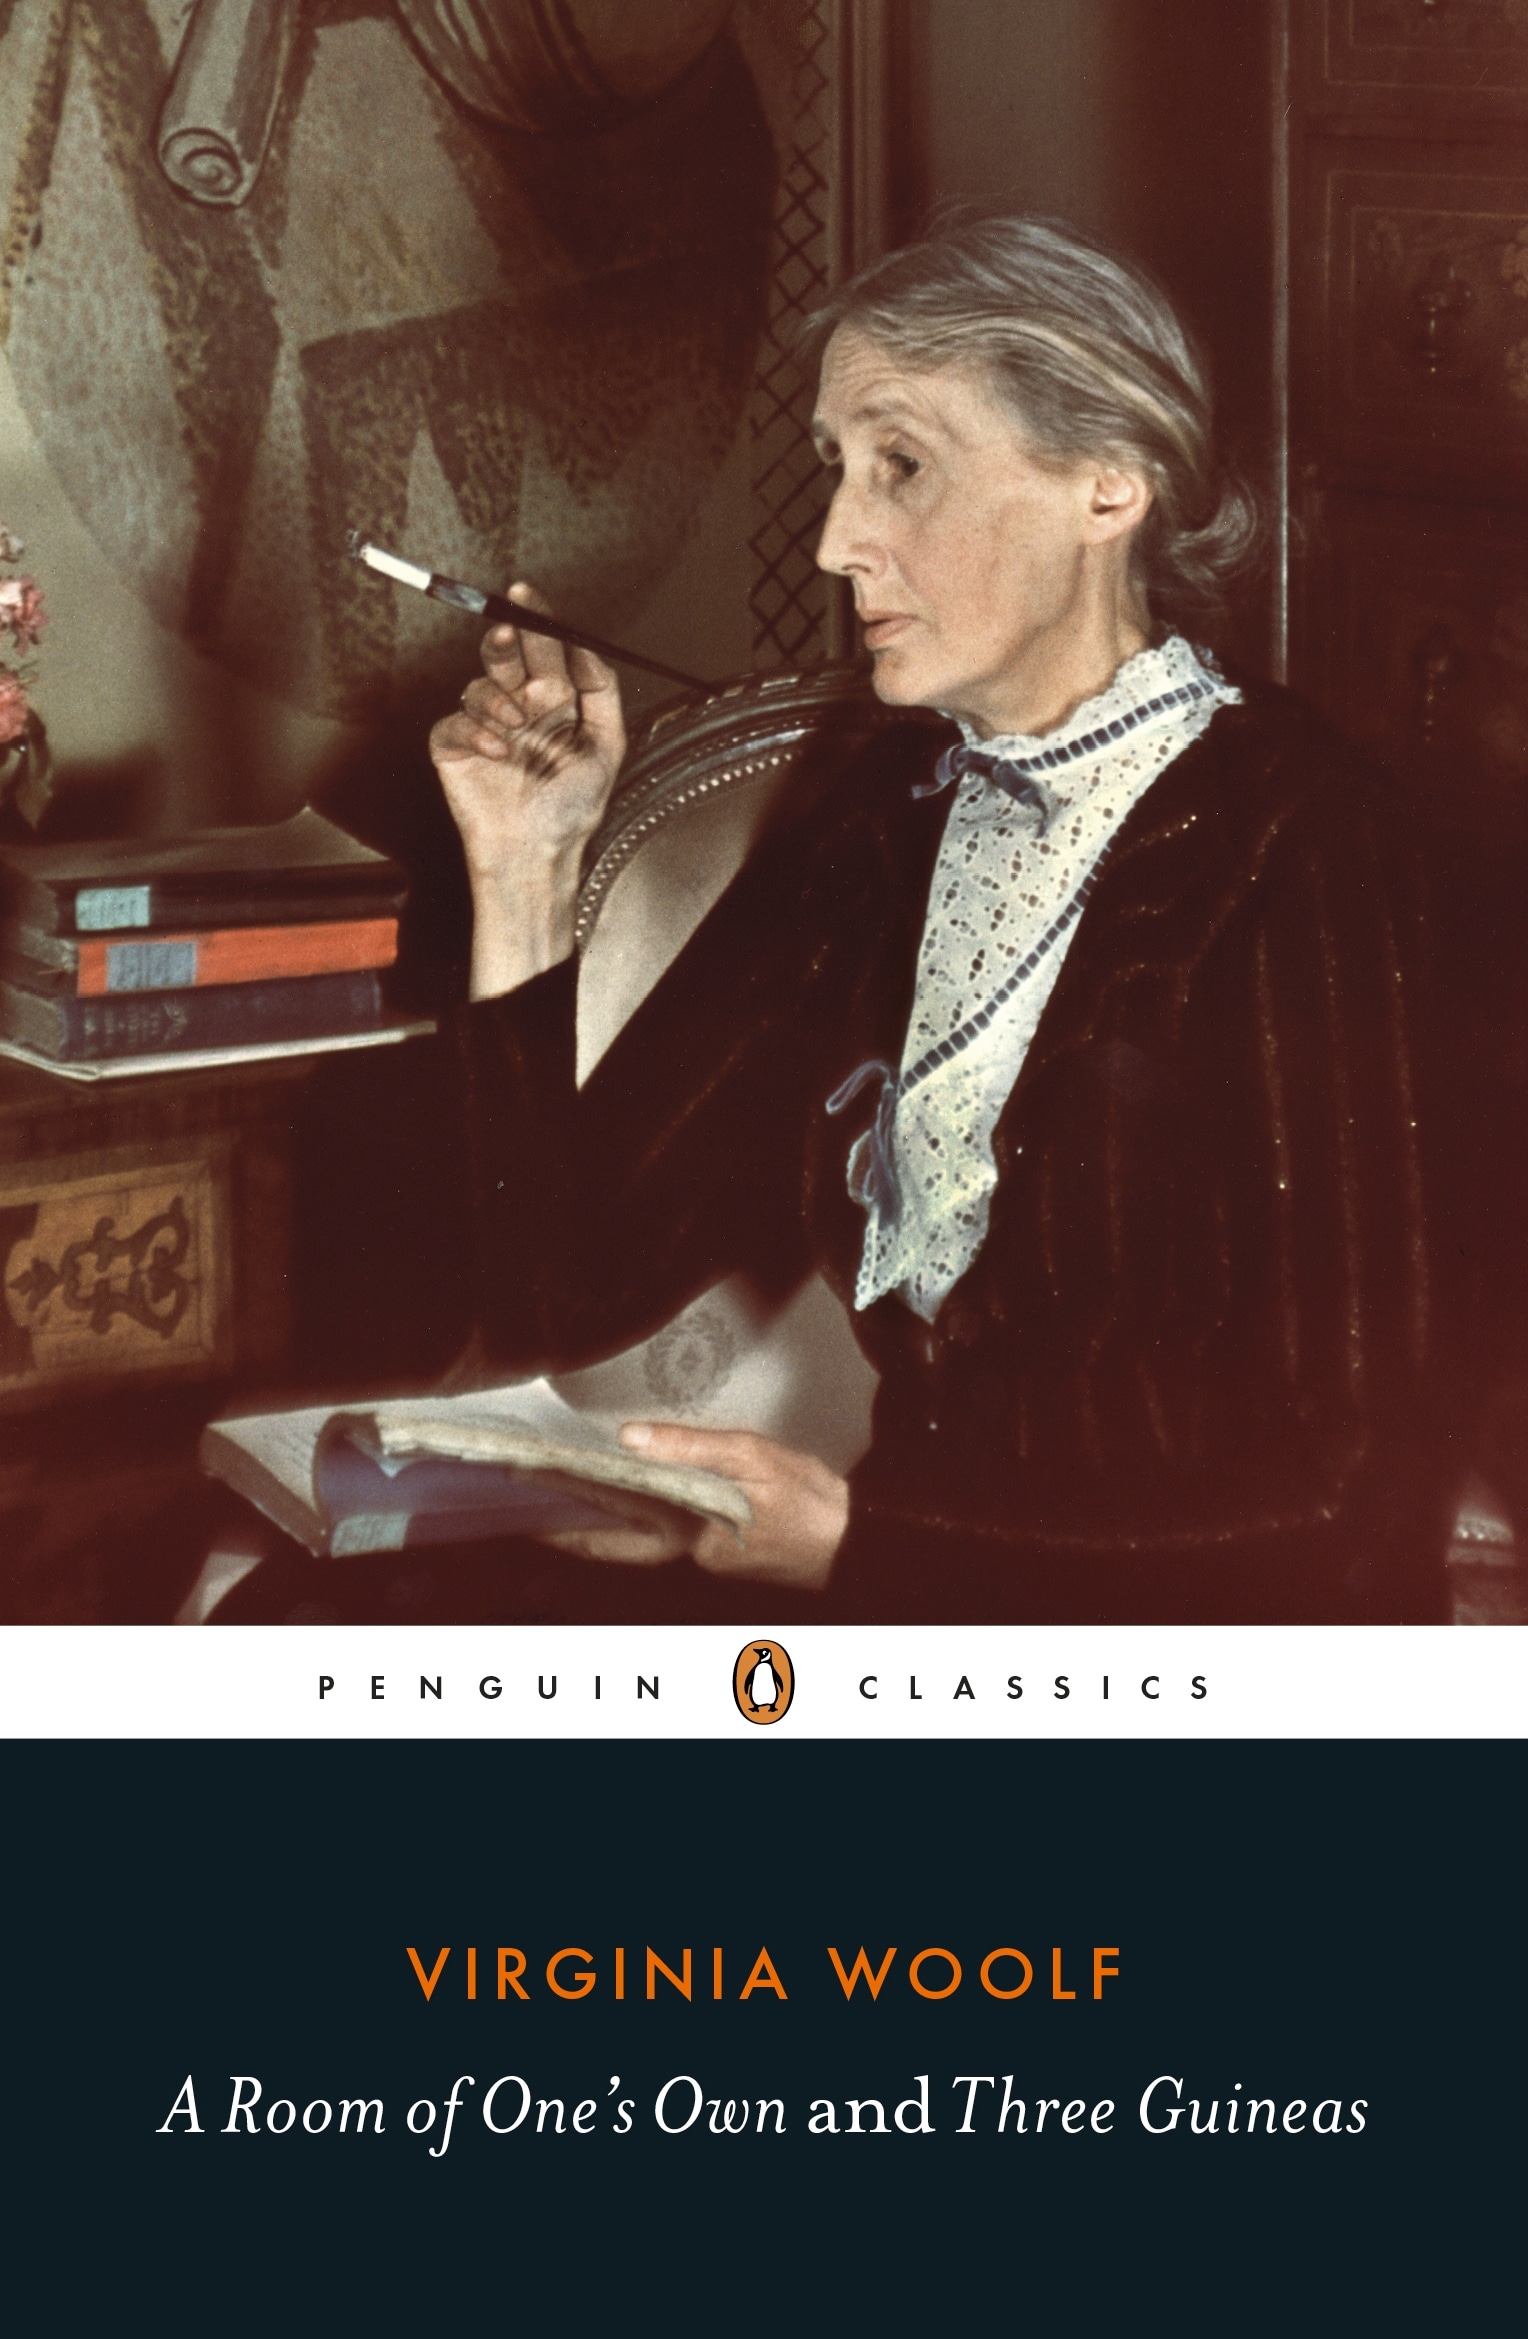 Book “A Room of One's Own/Three Guineas” by Virginia Woolf — March 7, 2019